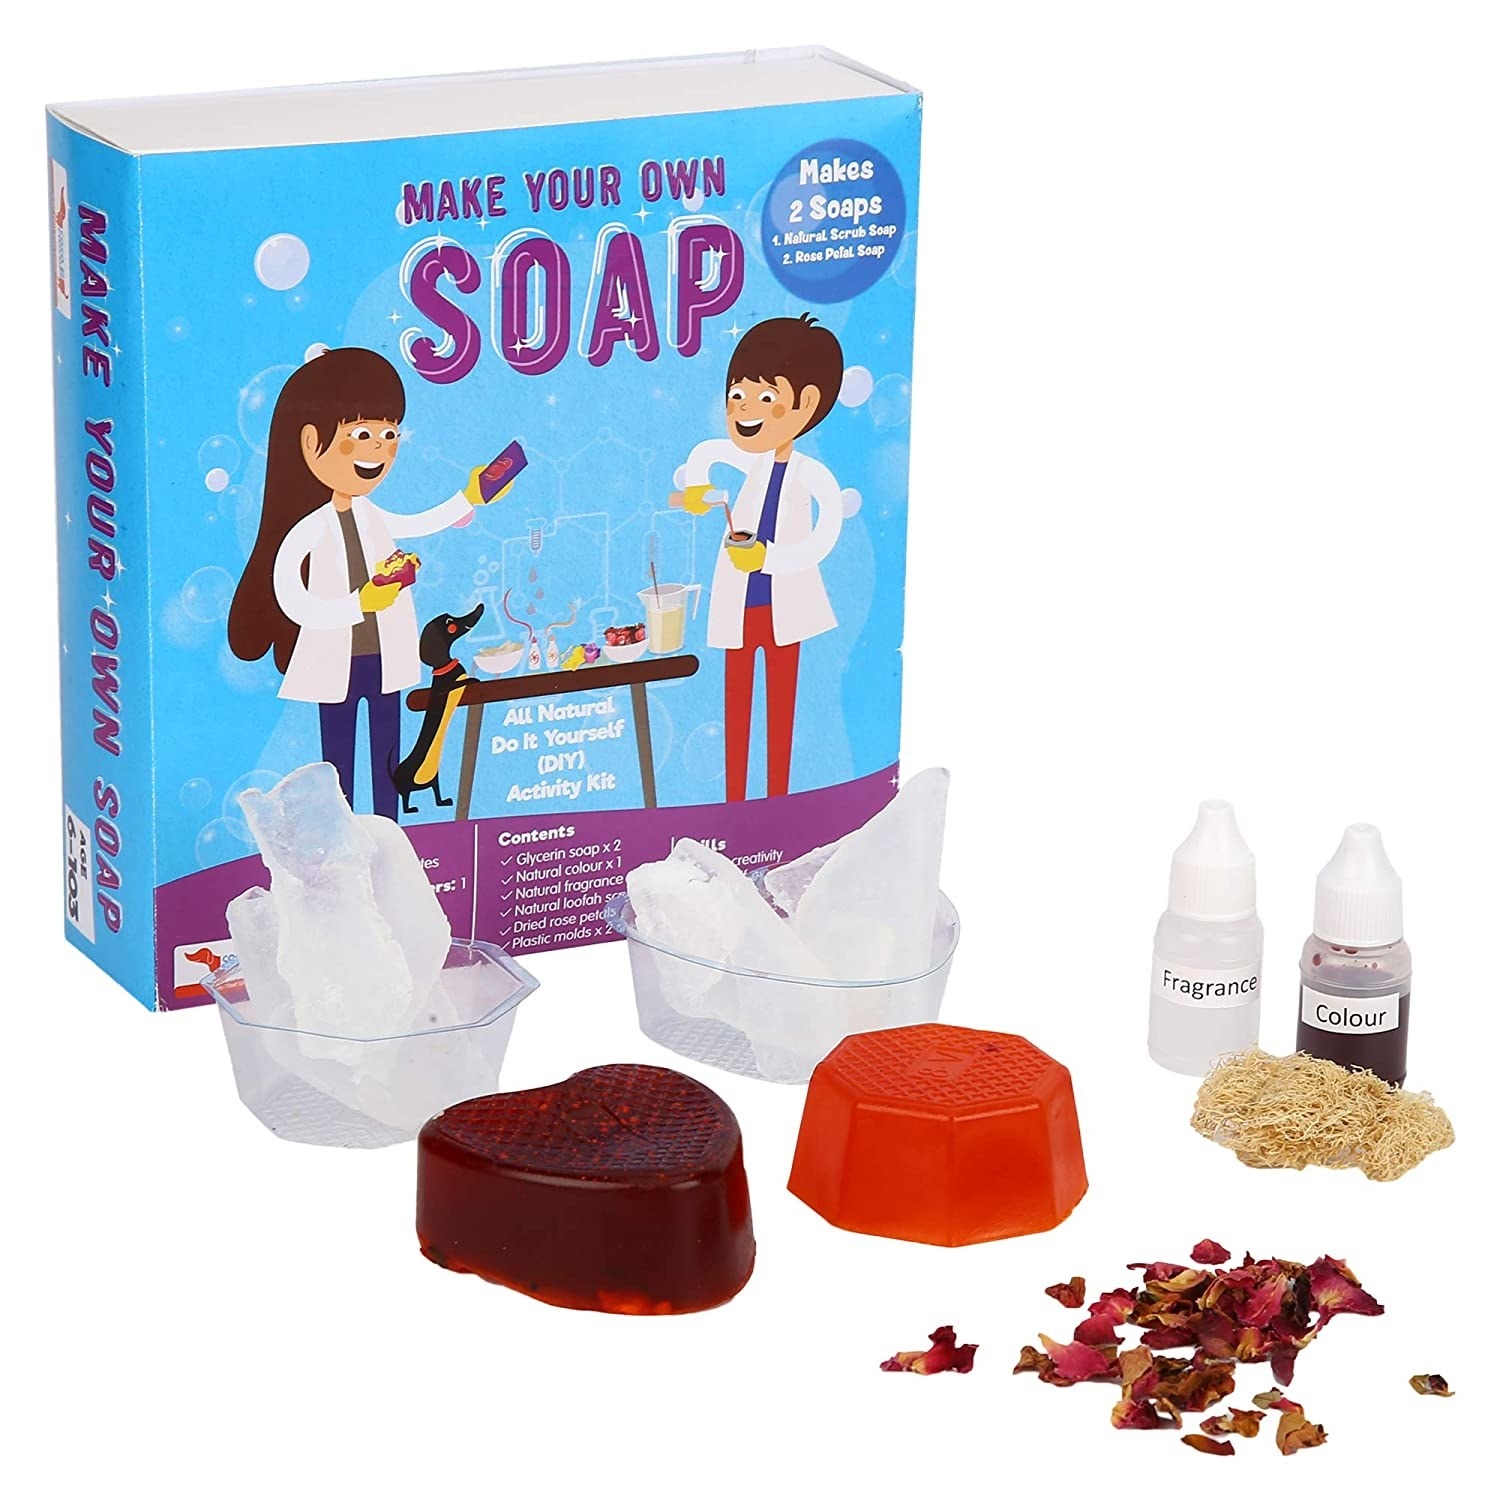 A soap making kit for kids with all the ingredients.